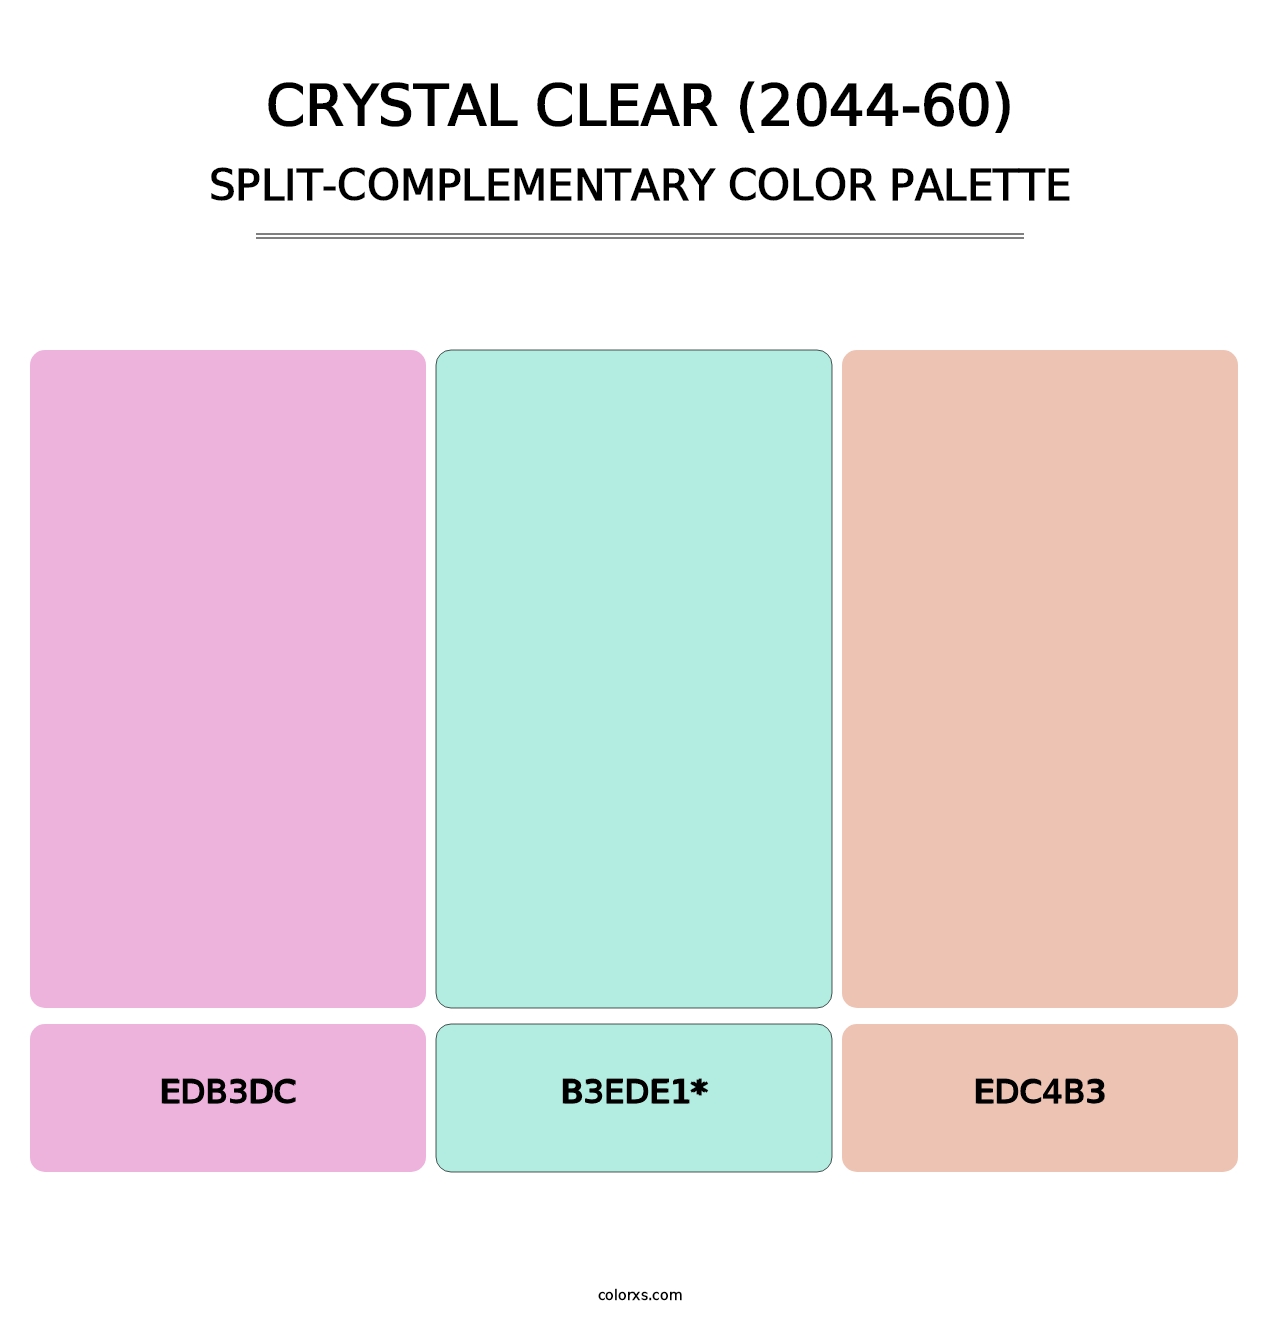 Crystal Clear (2044-60) - Split-Complementary Color Palette